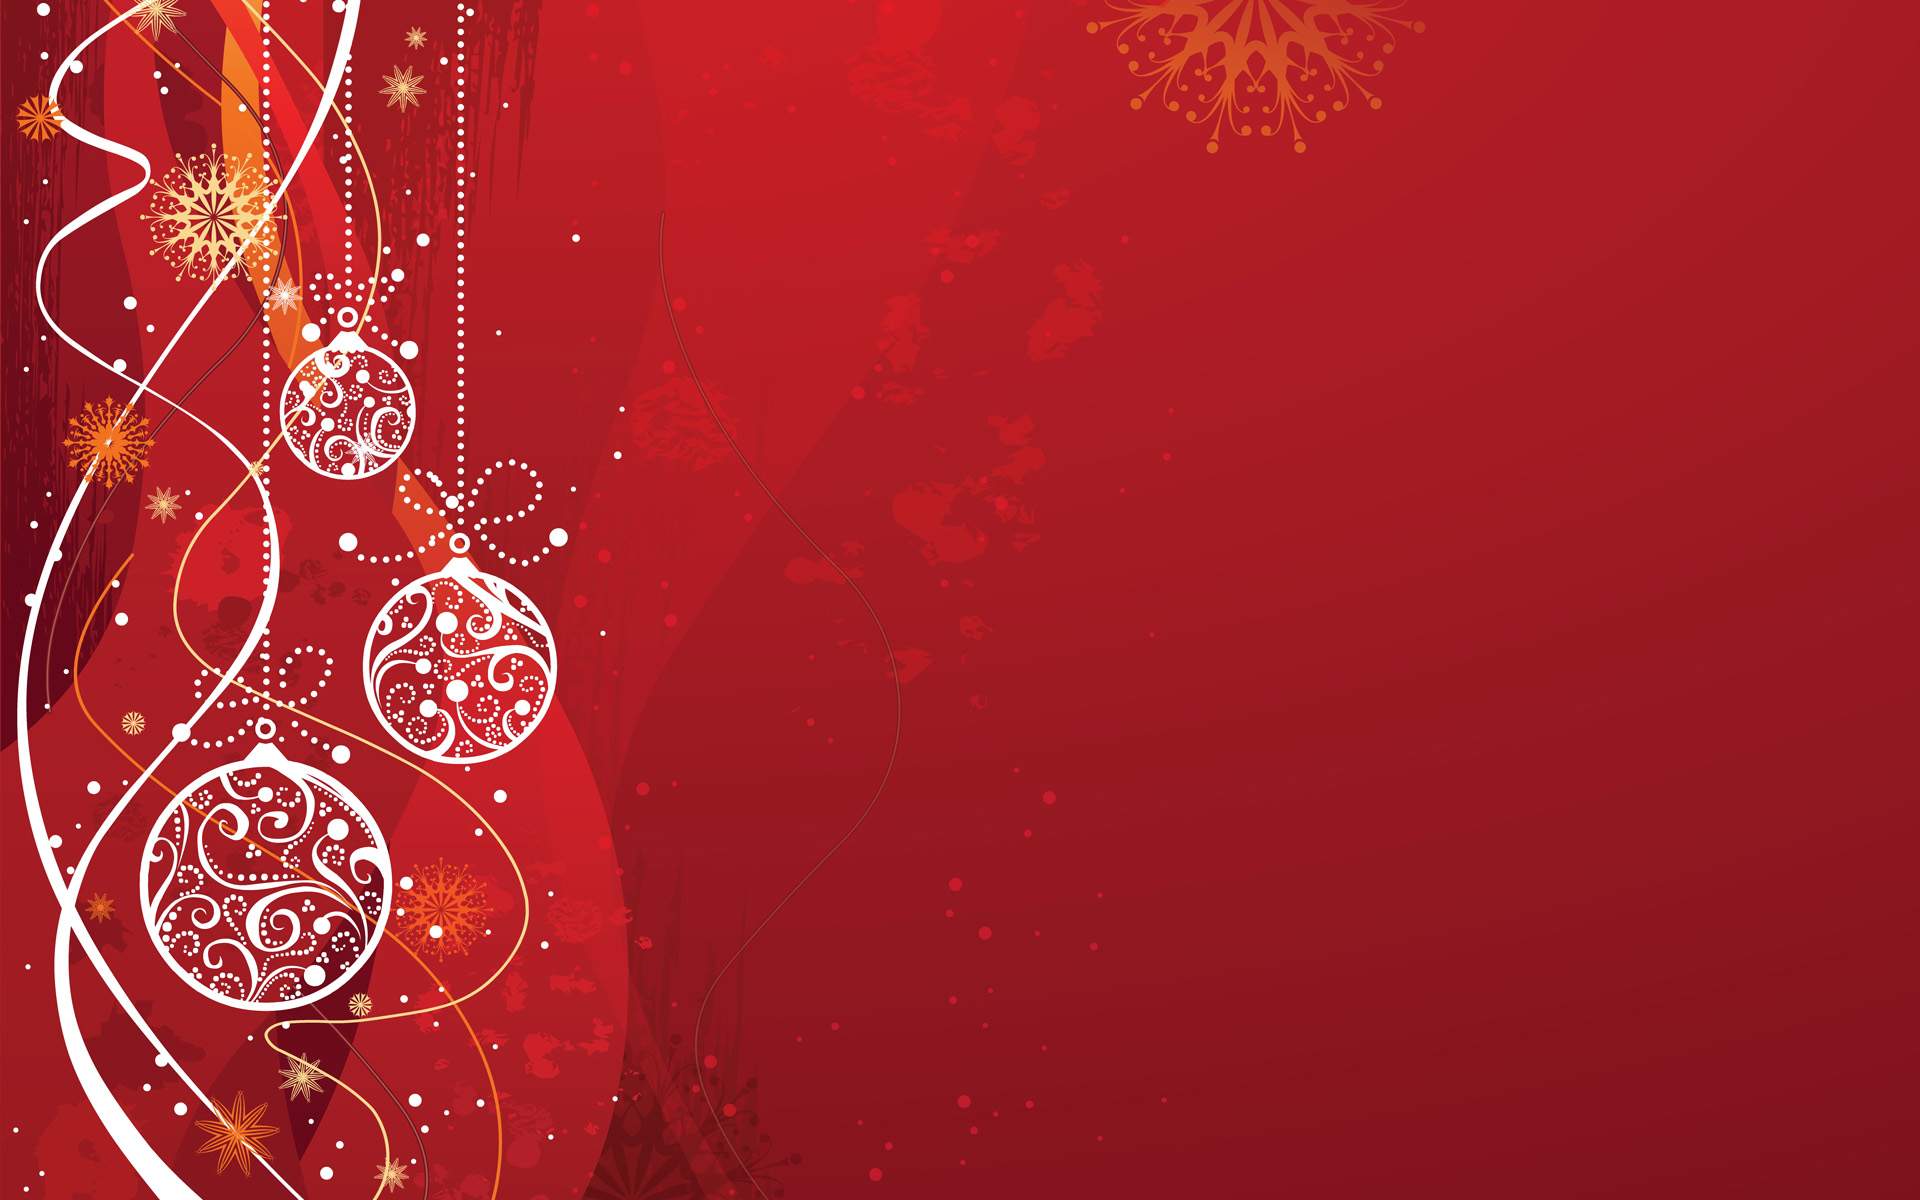 christian christmas wallpapers backgrounds #23